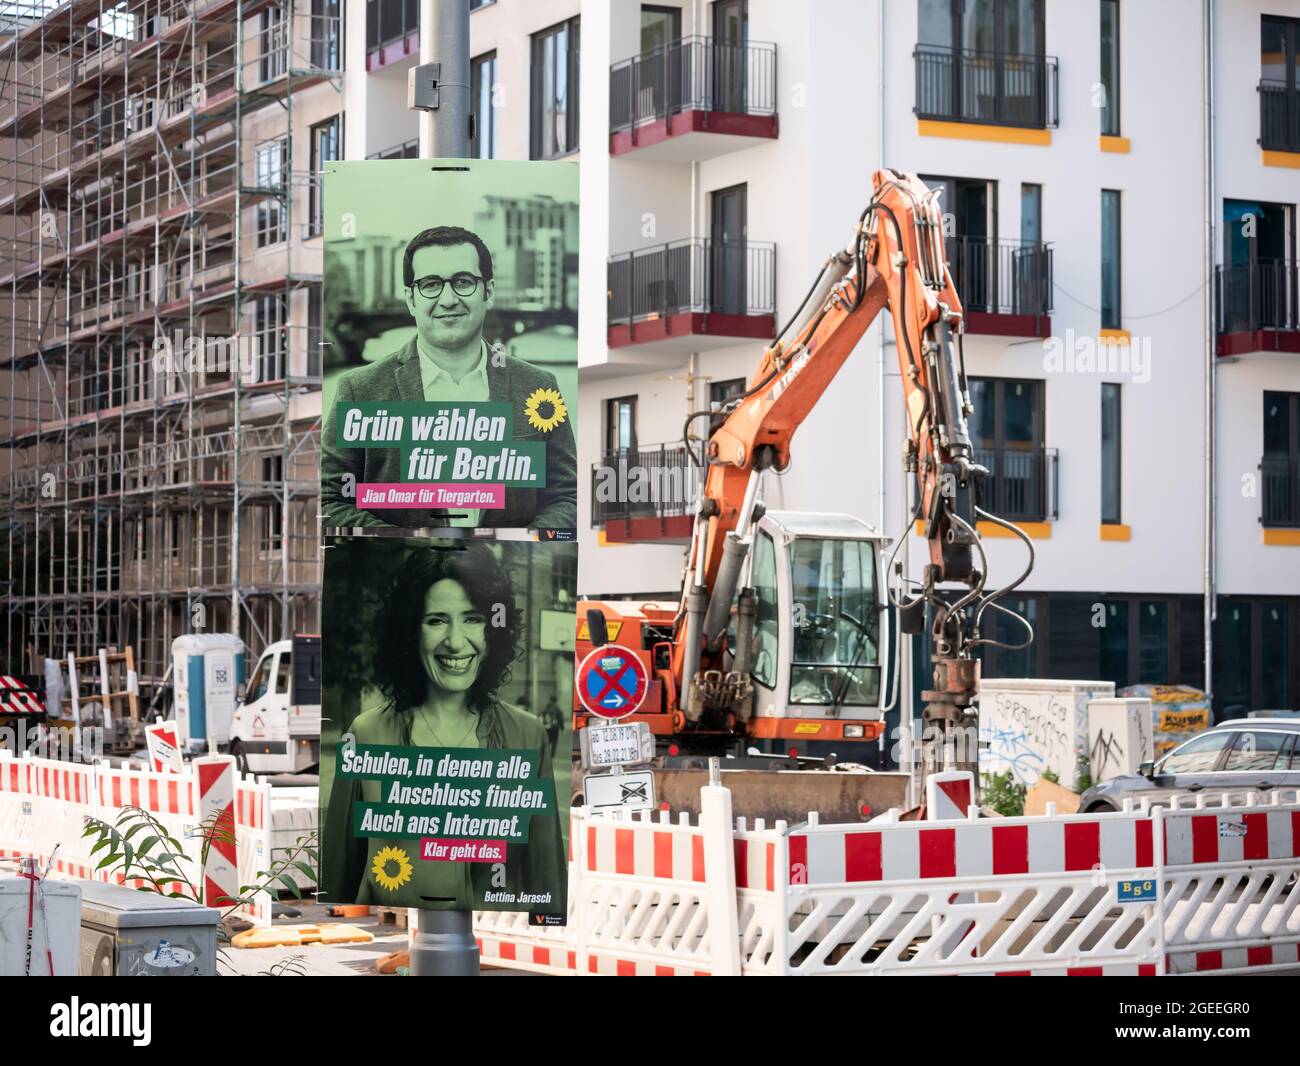 Campaign Posters of The Greens In Front of A Construction Site In Berlin Stock Photo